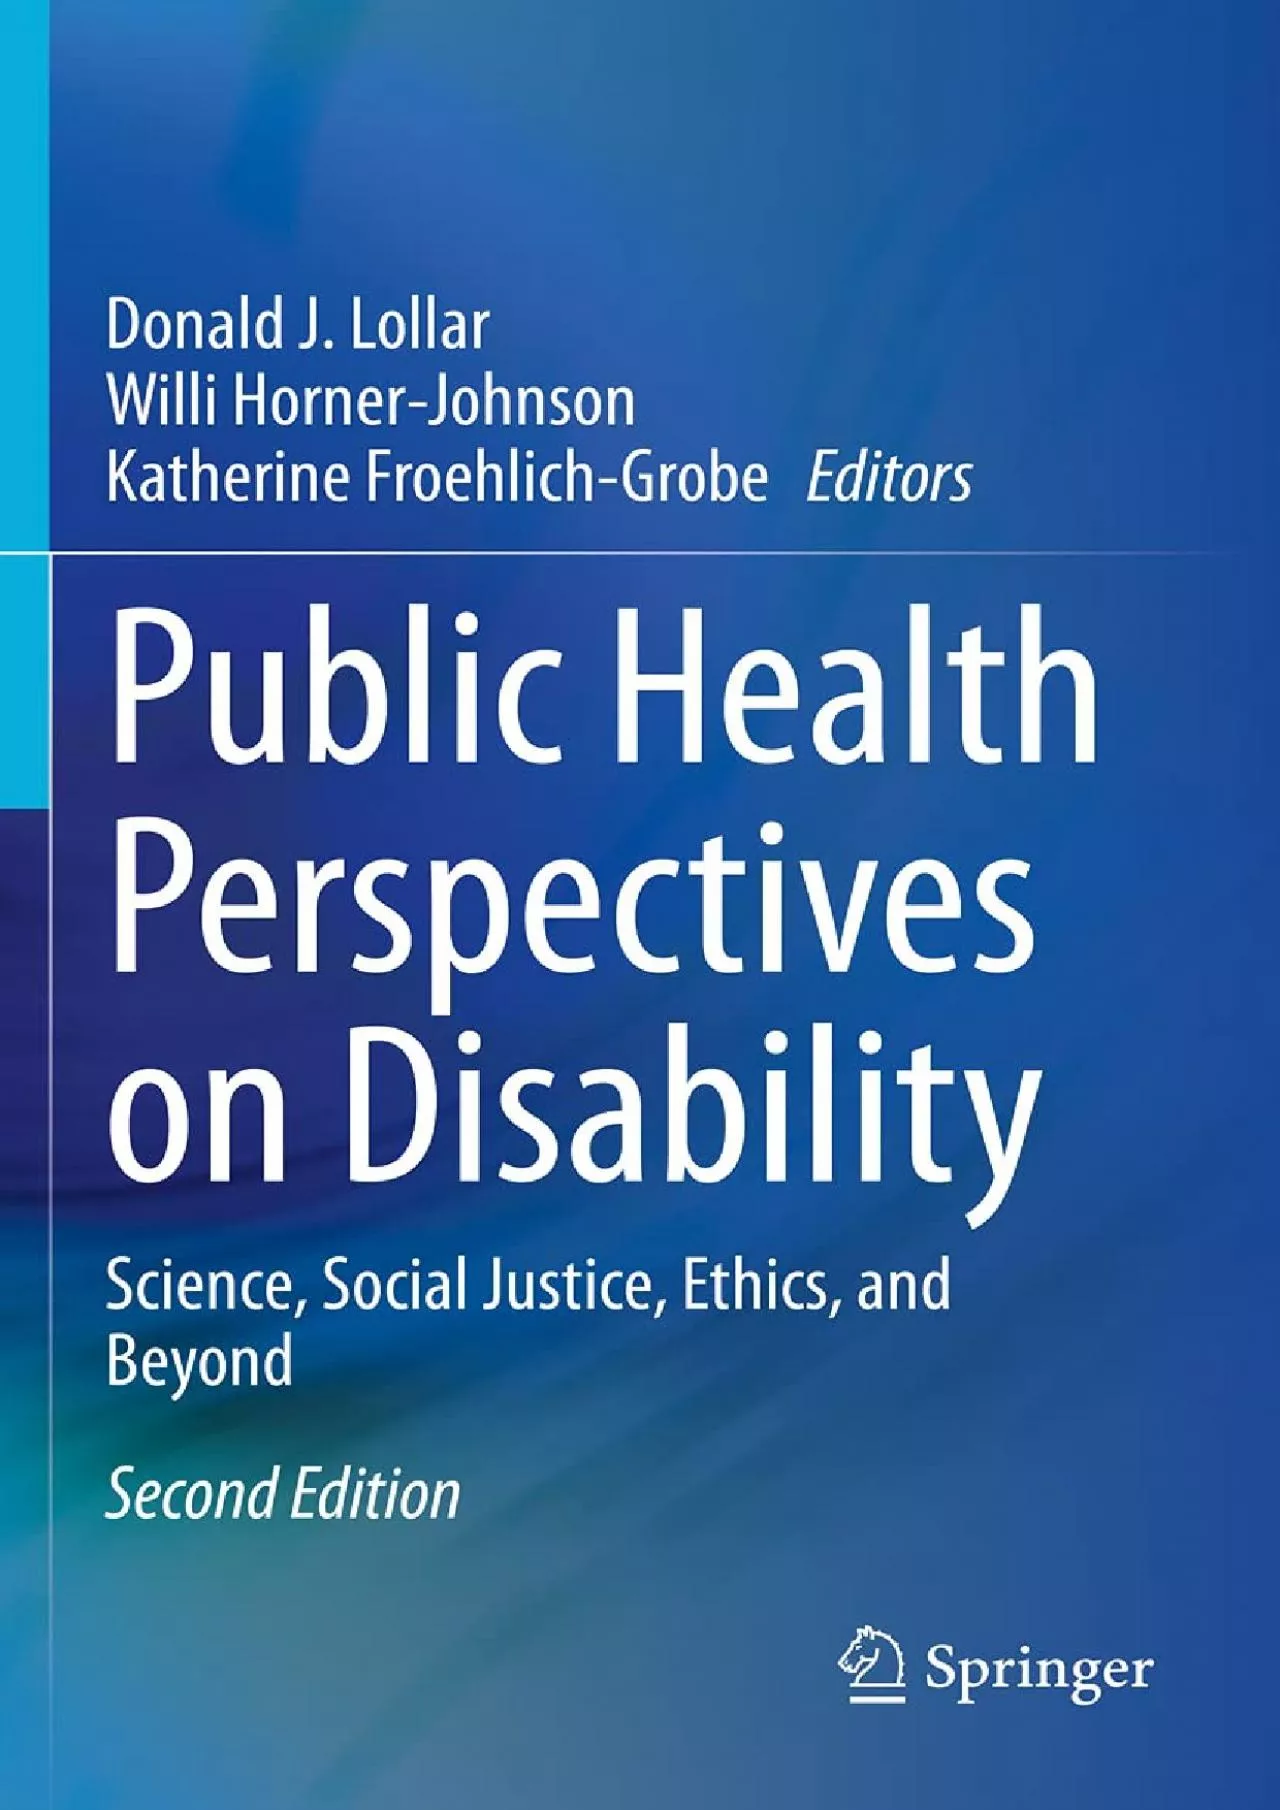 (DOWNLOAD)-Public Health Perspectives on Disability: Science, Social Justice, Ethics,